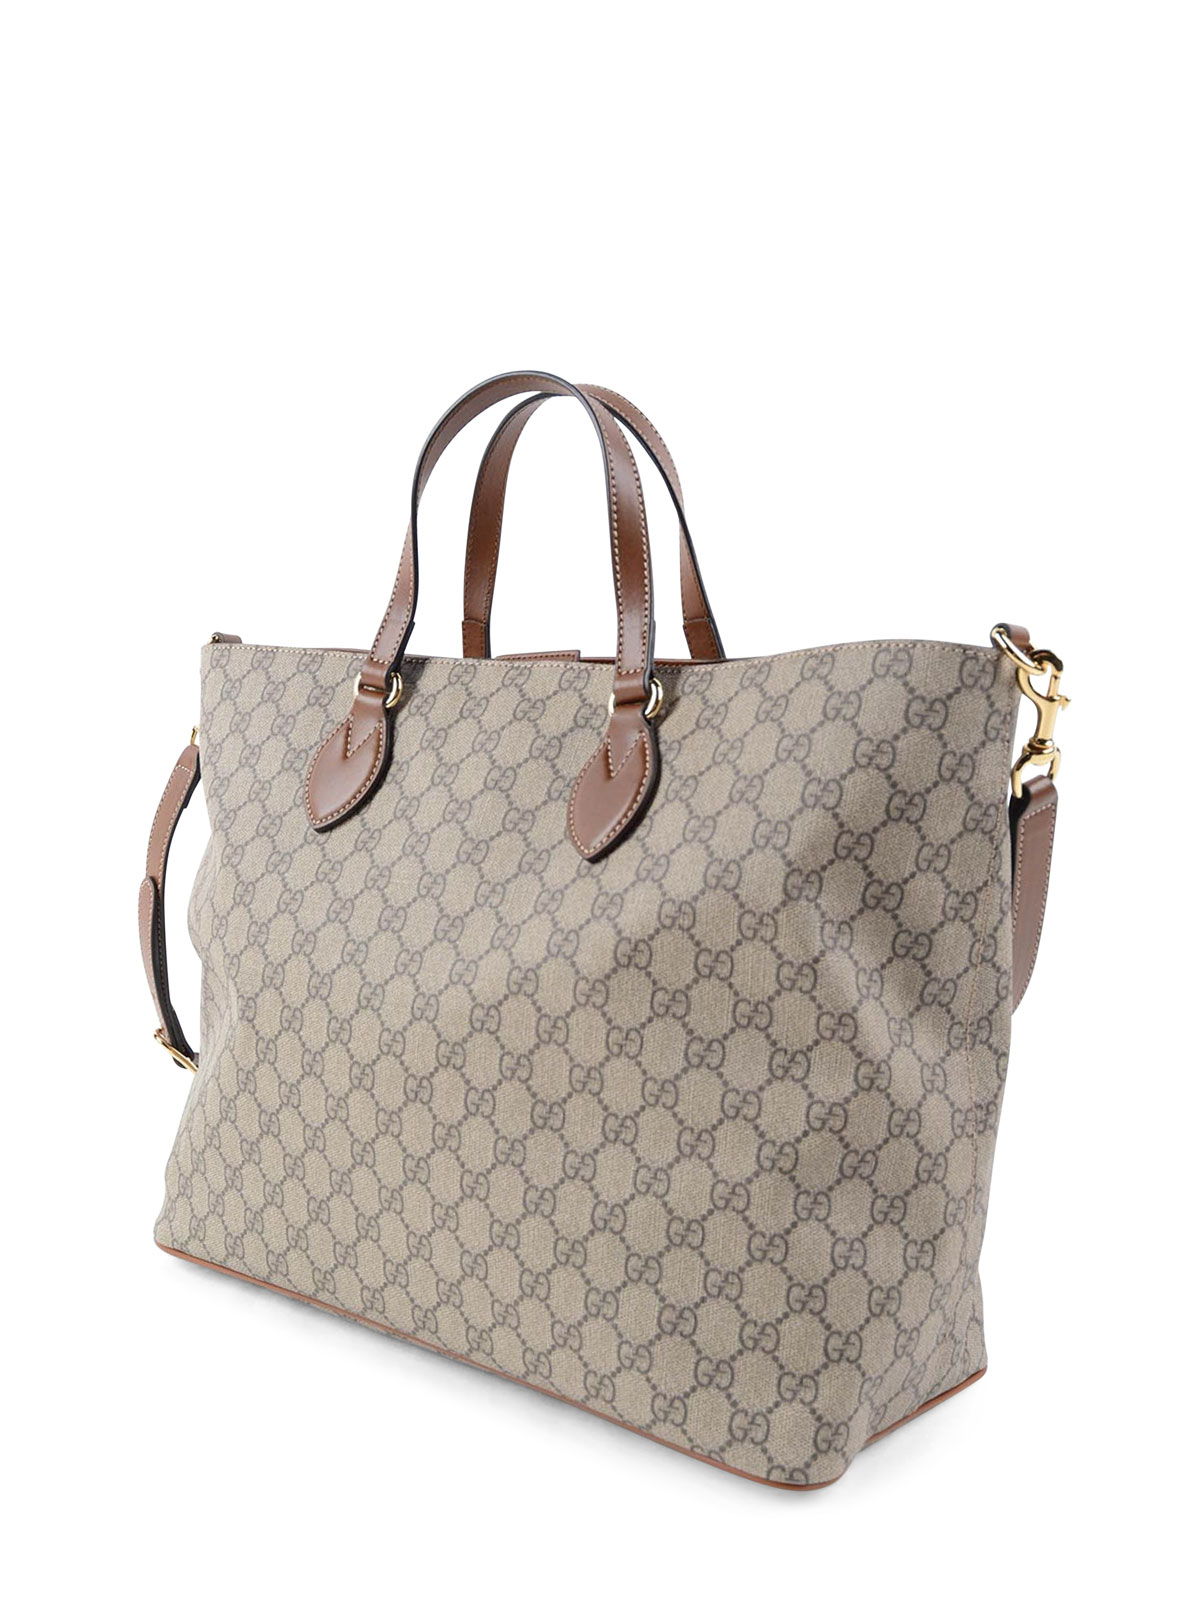 GG Supreme canvas tote bag by Gucci - totes bags | Shop online at www.bagssaleusa.com